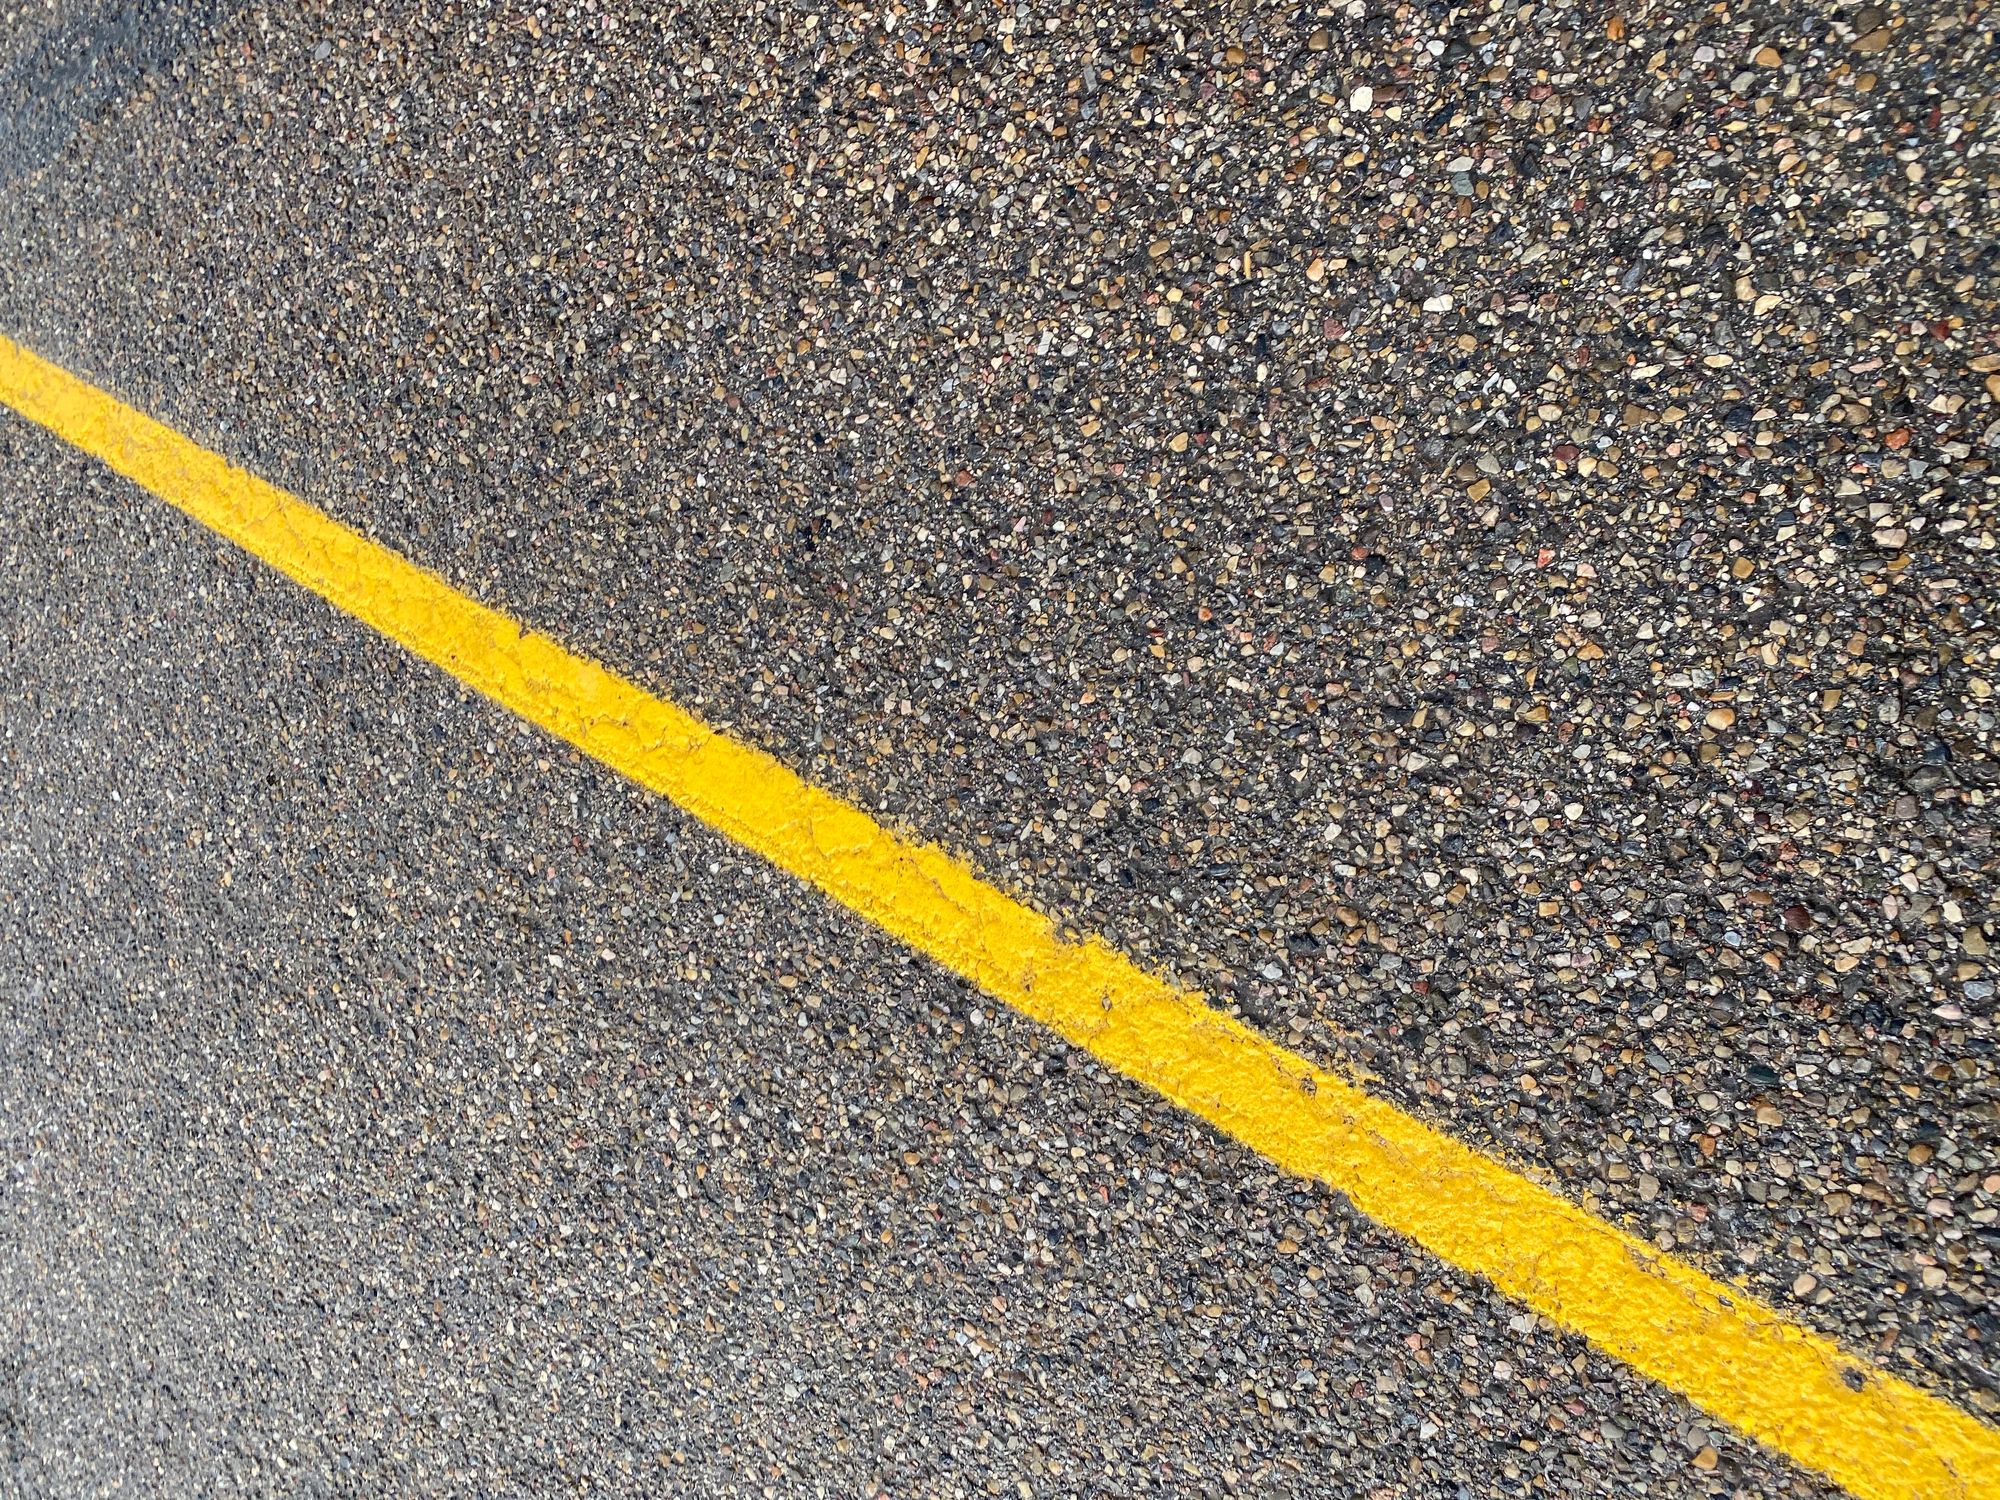 A yellow line on a roadway.